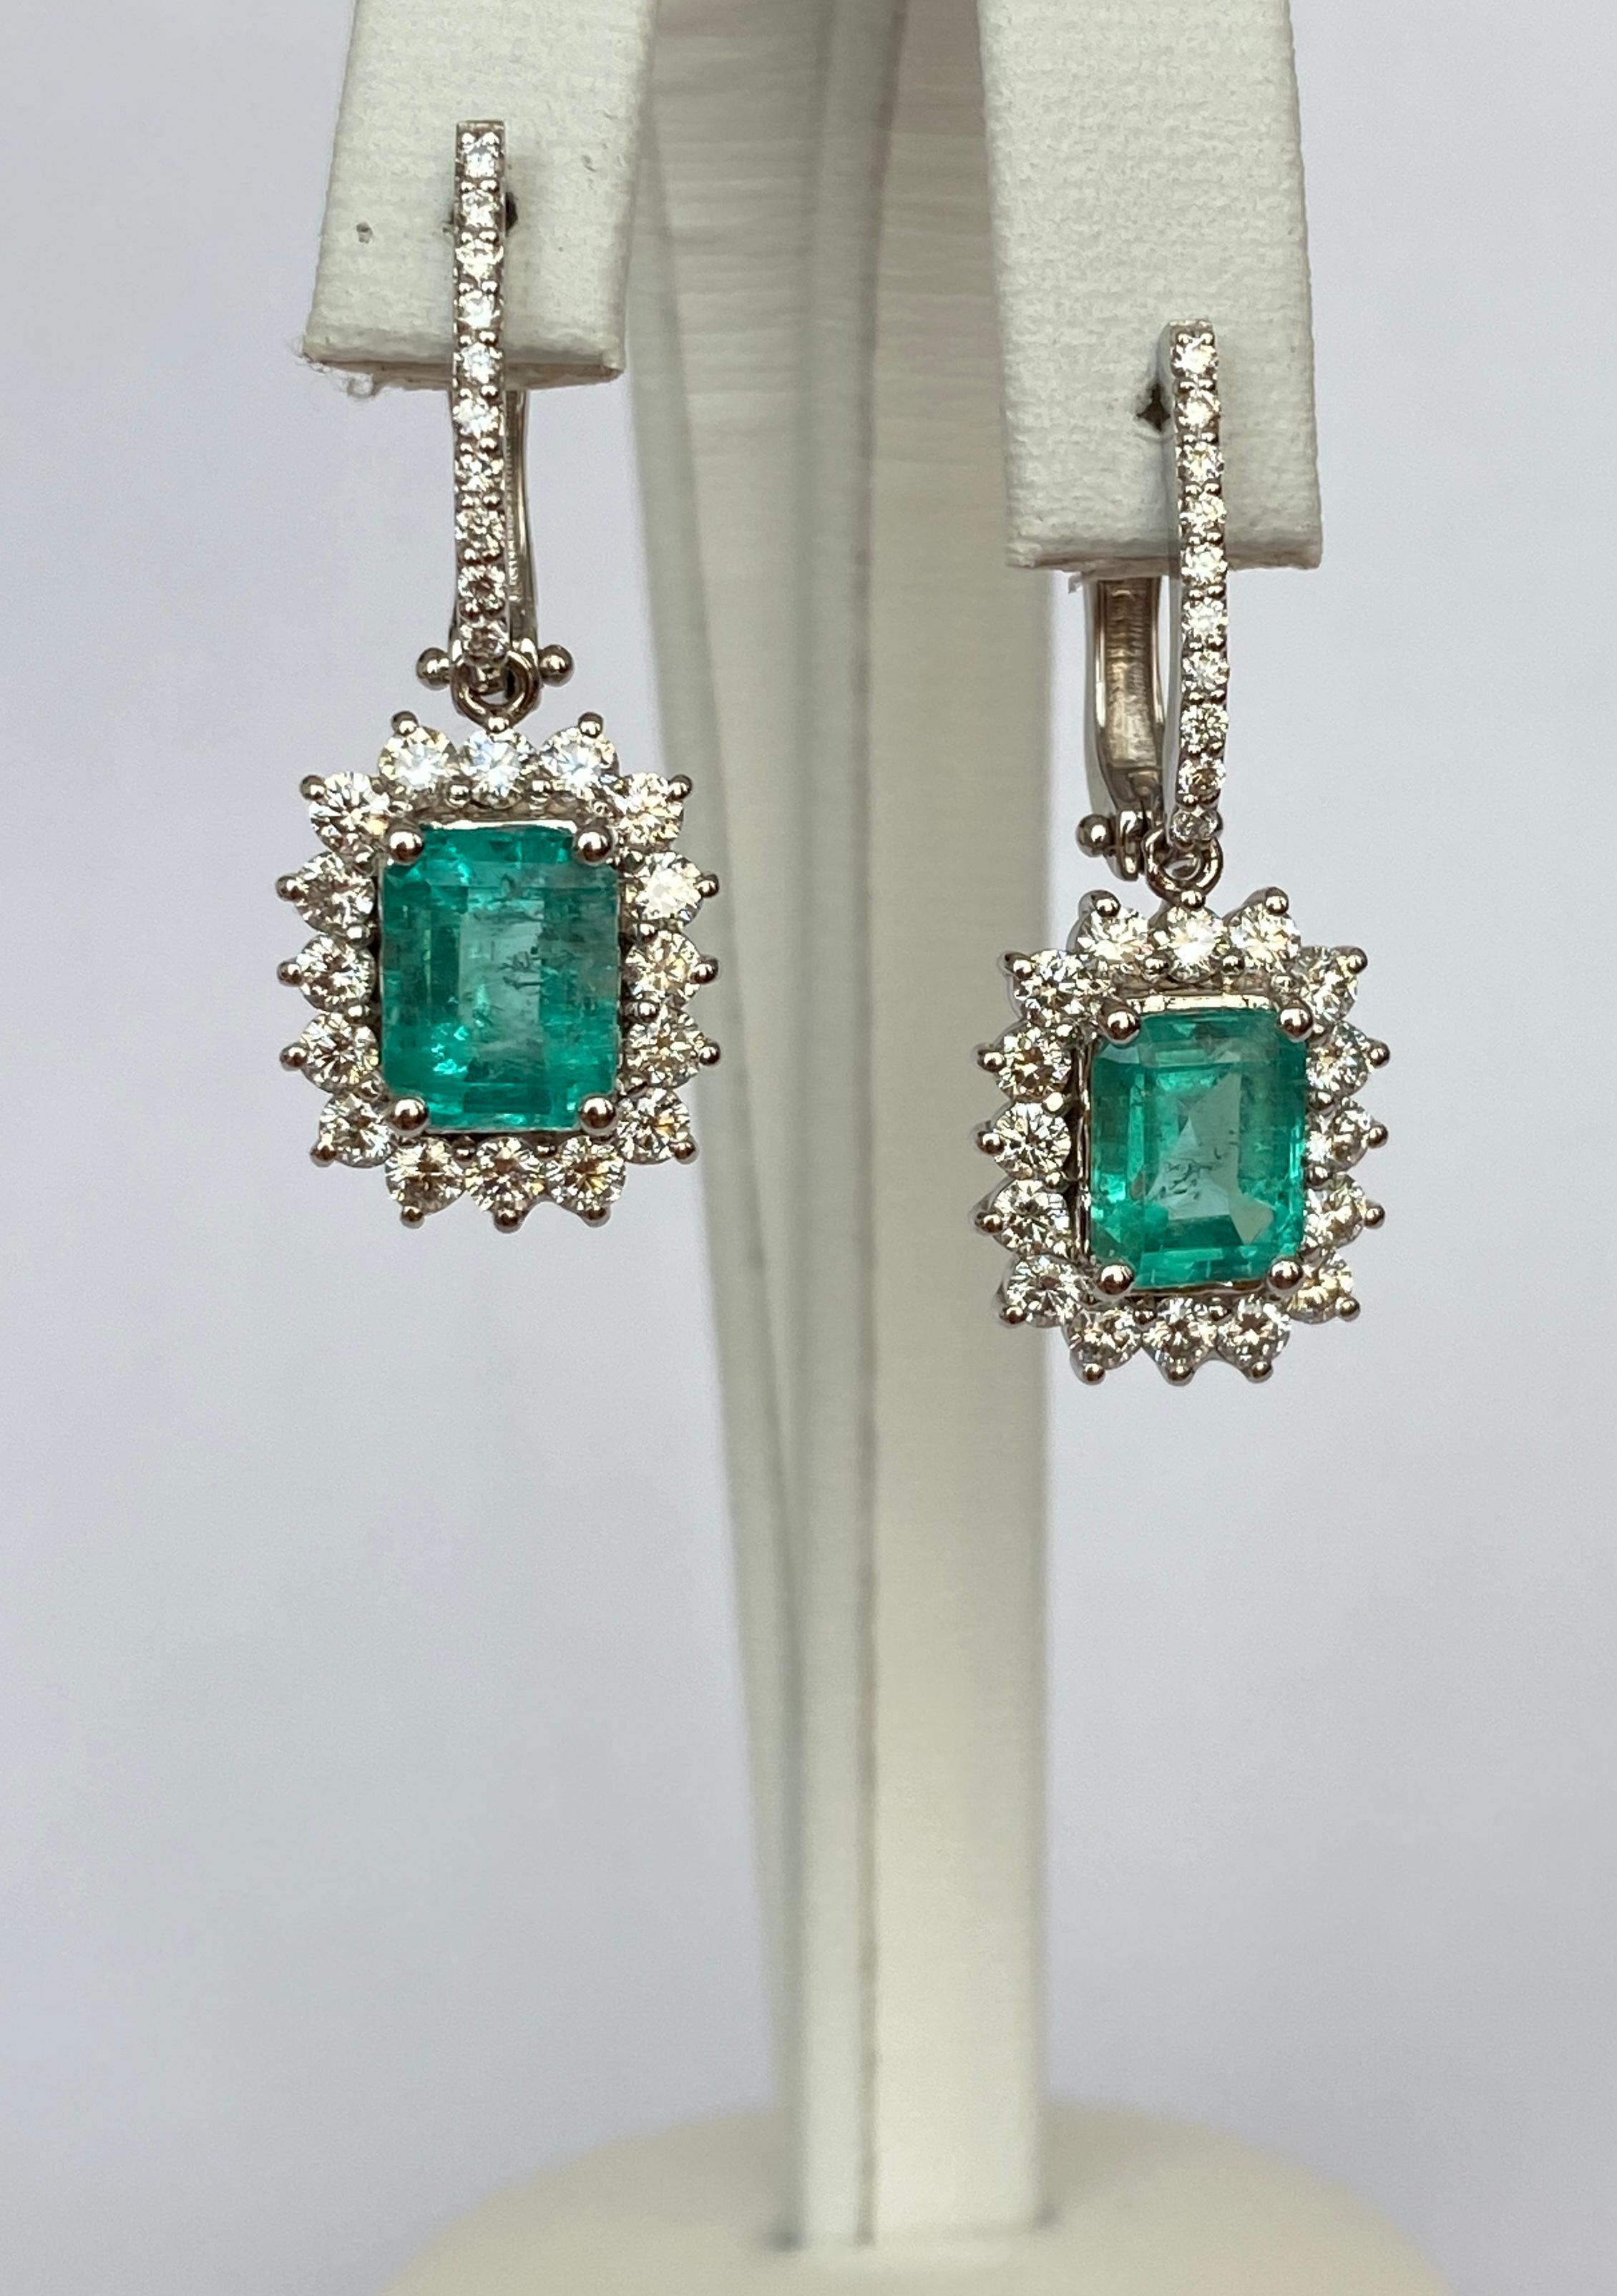 Offered in new condition, beautiful earrings in white gold, set with 2 pieces of emerald cut emerald 2.55 ct, which are decorated with 52 pieces of brilliant cut diamonds together approx. 1.24 ct of quality F-G/VS. ALGT certificate is included. The